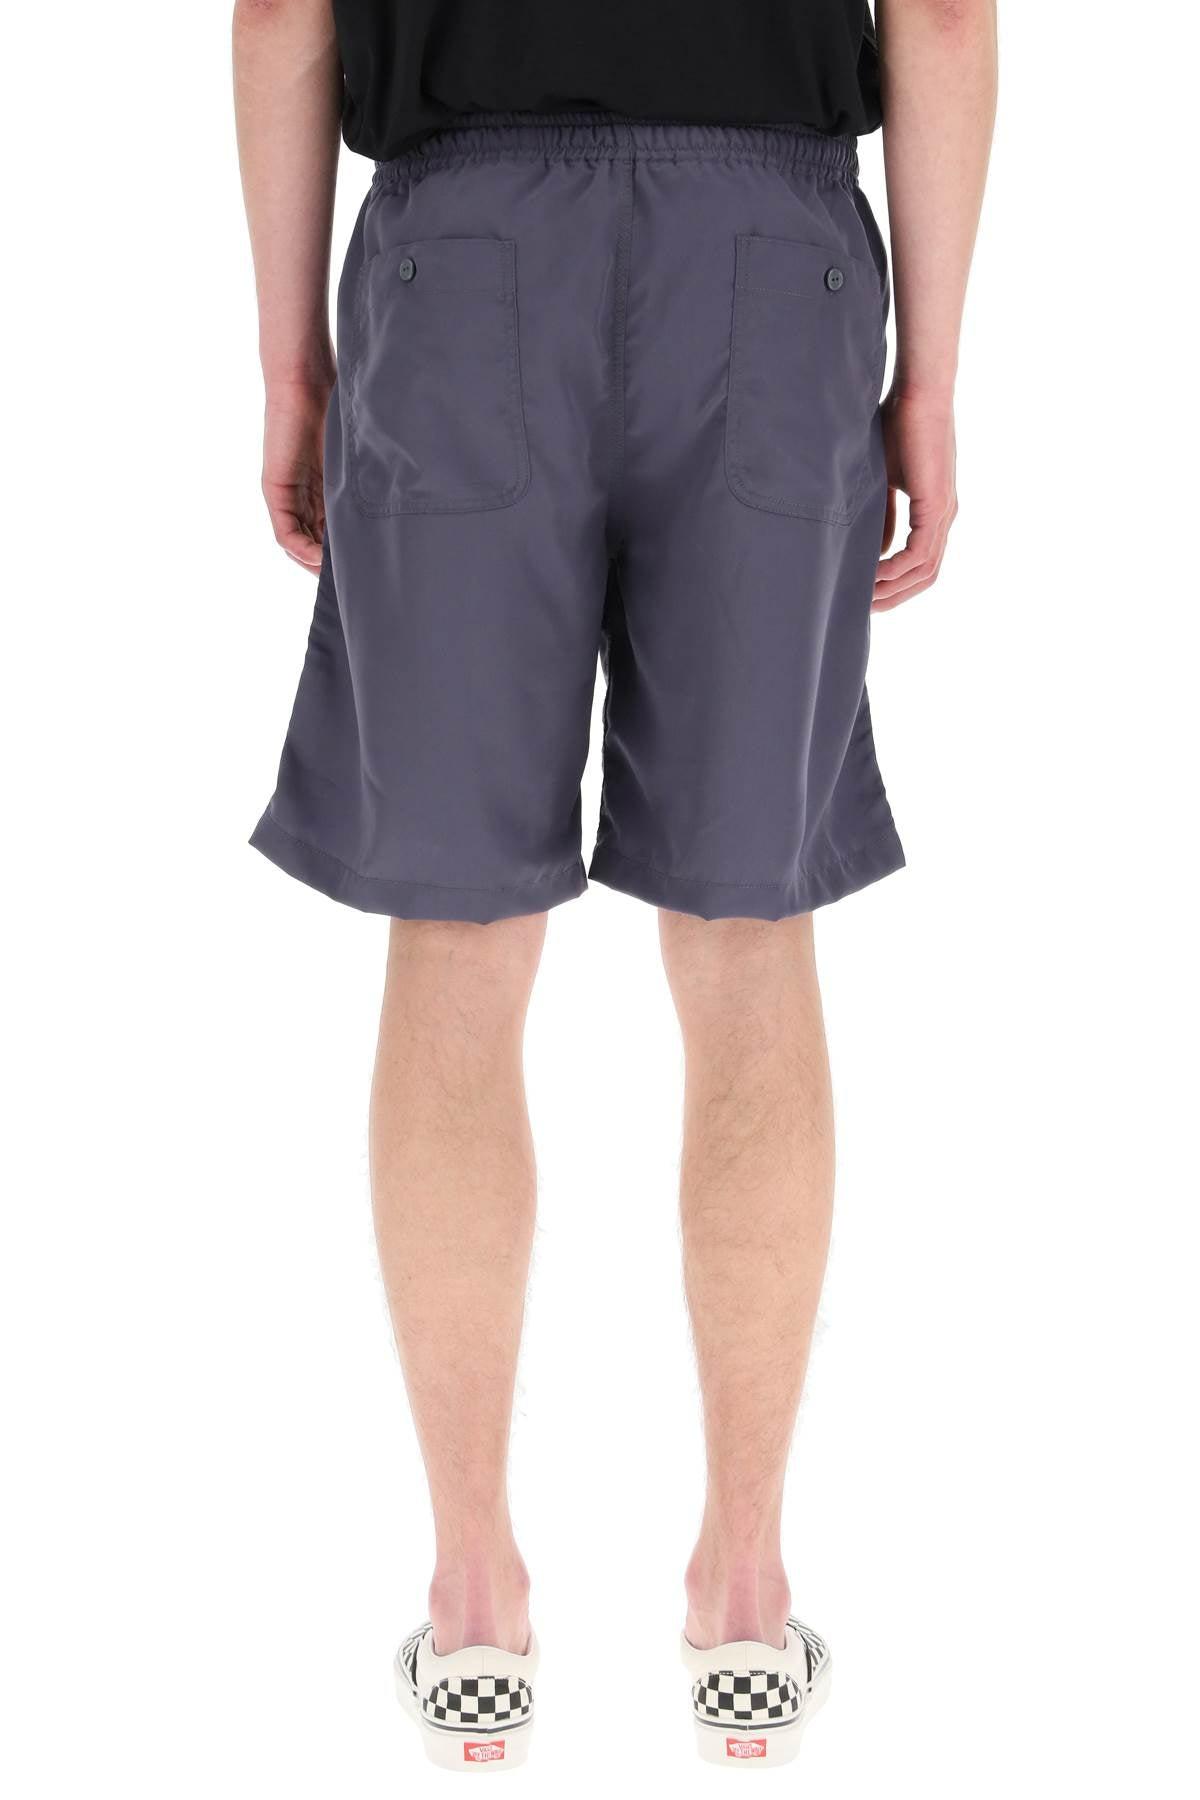 Needles Basketball Shorts With Logo in Smoke Purple (Blue) for Men 